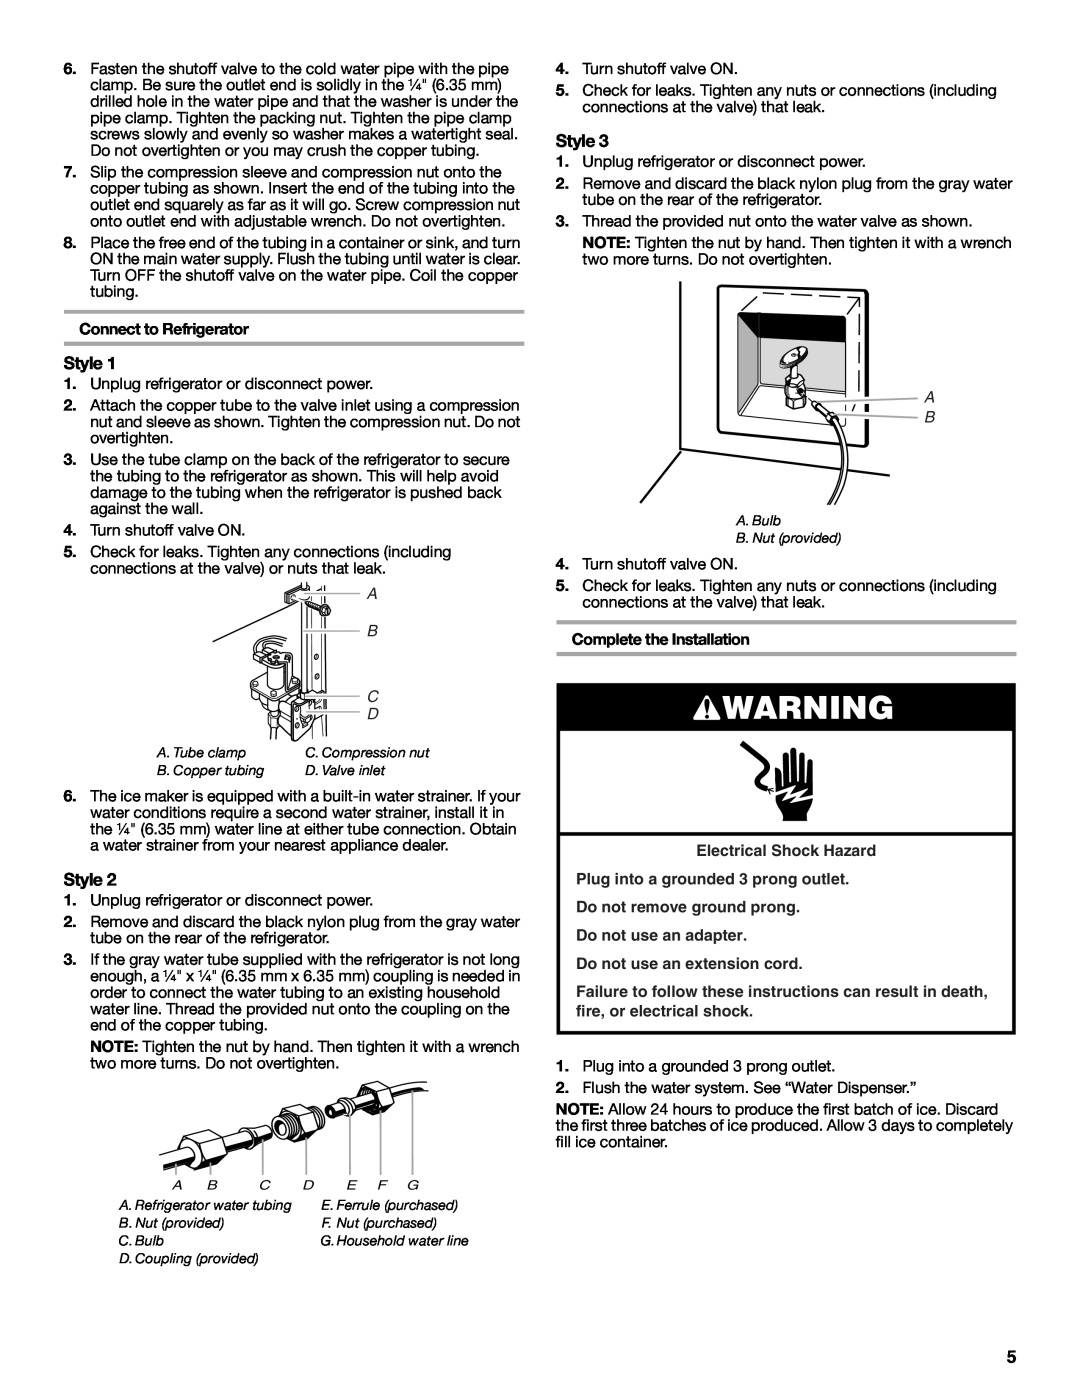 Whirlpool 2314473B warranty Style, Connect to Refrigerator, Complete the Installation, Do not use an extension cord 